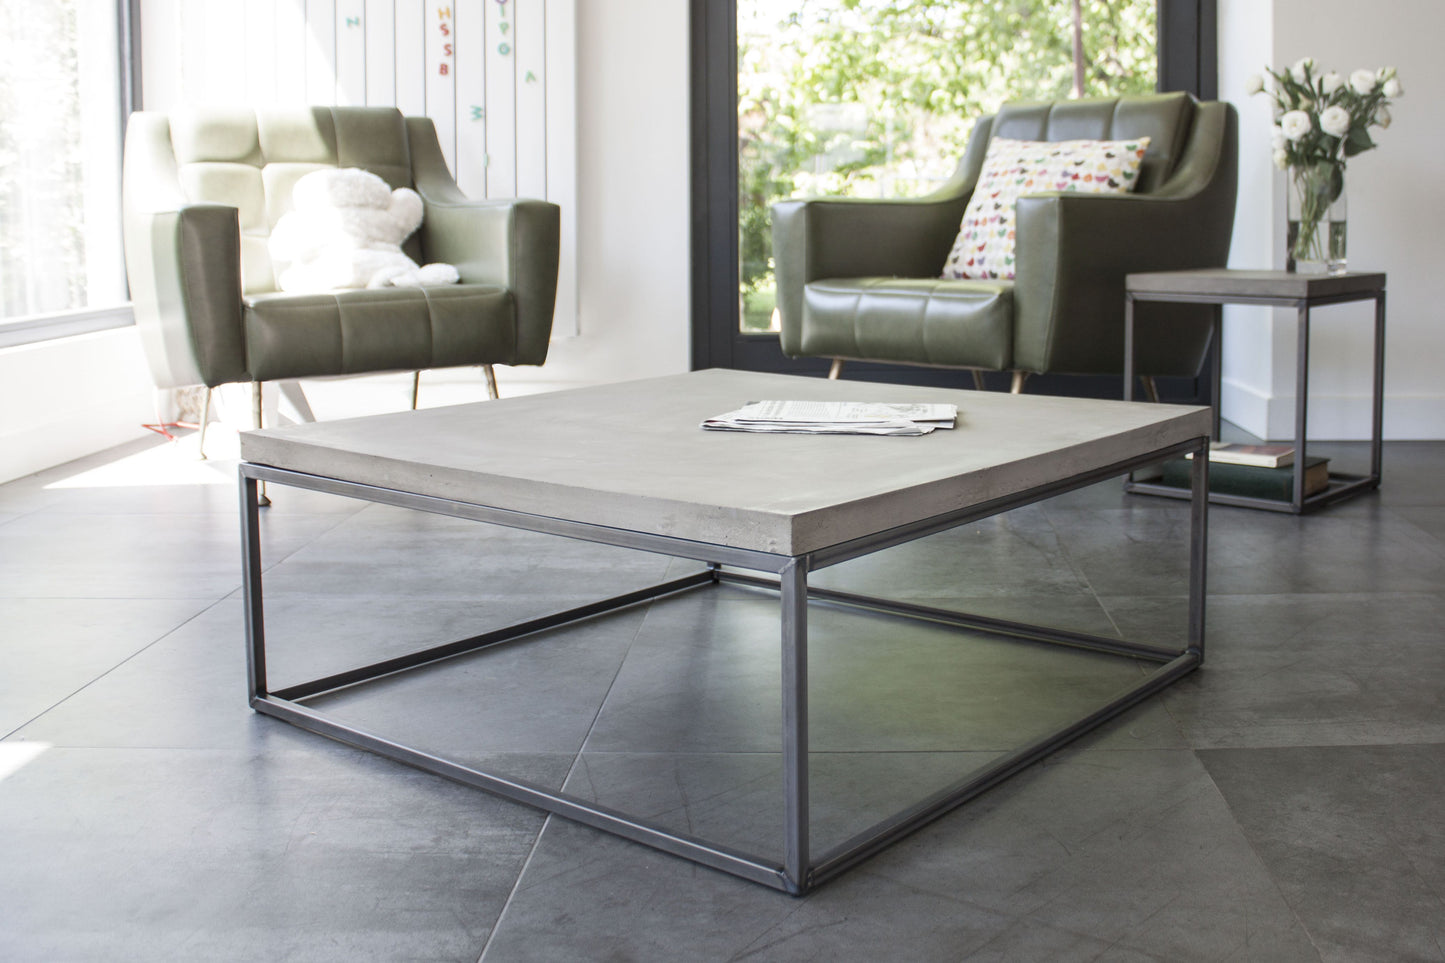 Perspective Square Coffee Table